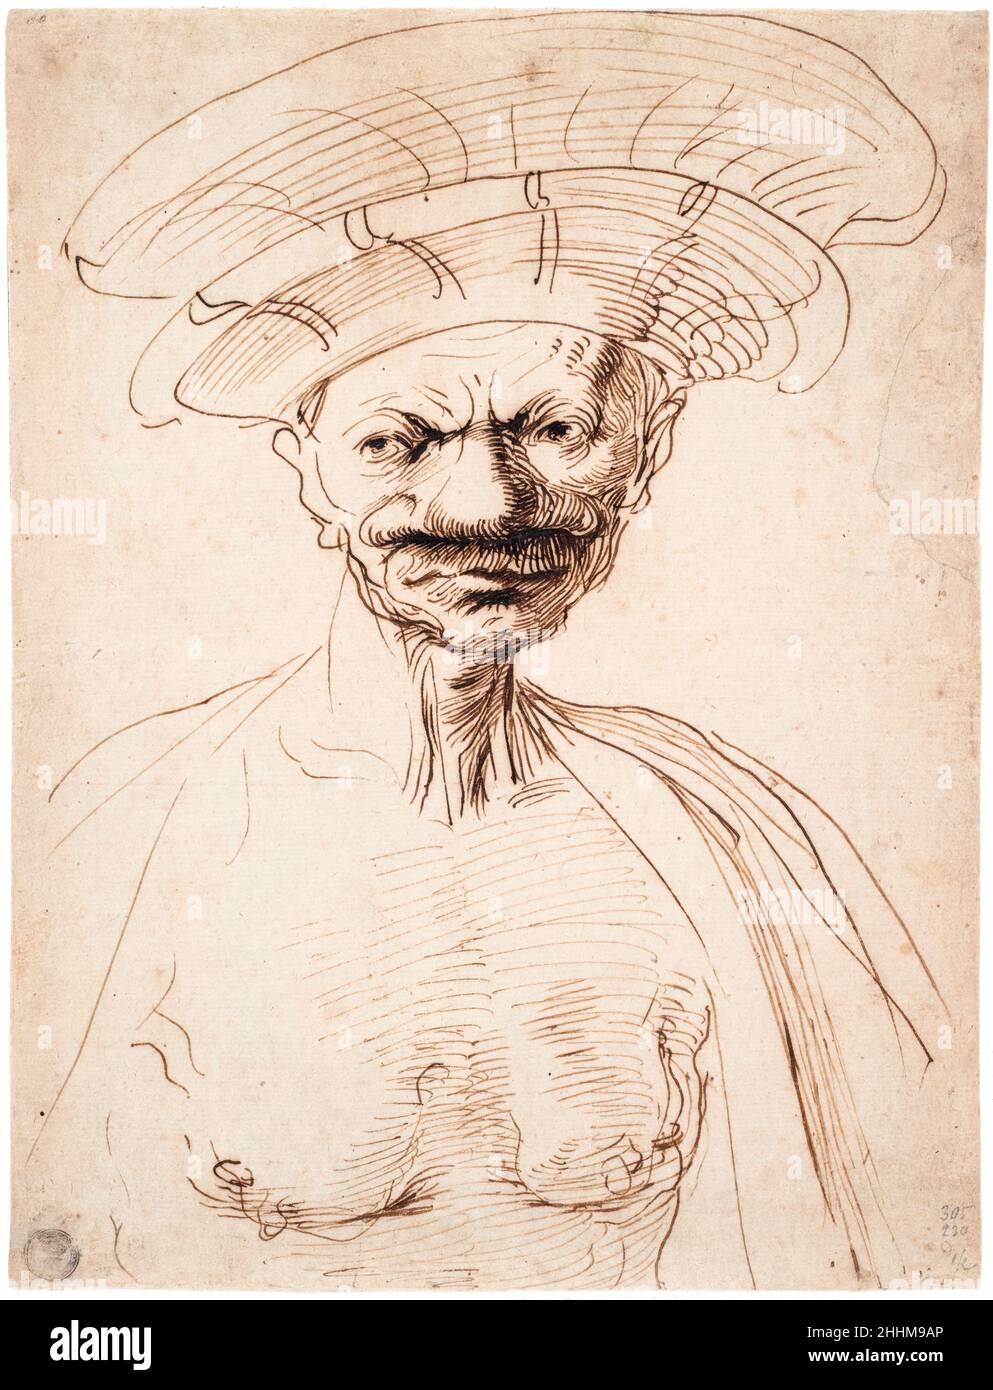 Man Wearing a Large Hat, caricature by Giovanni Francesco Barbieri (Guercino), 1630-1640 Stock Photo